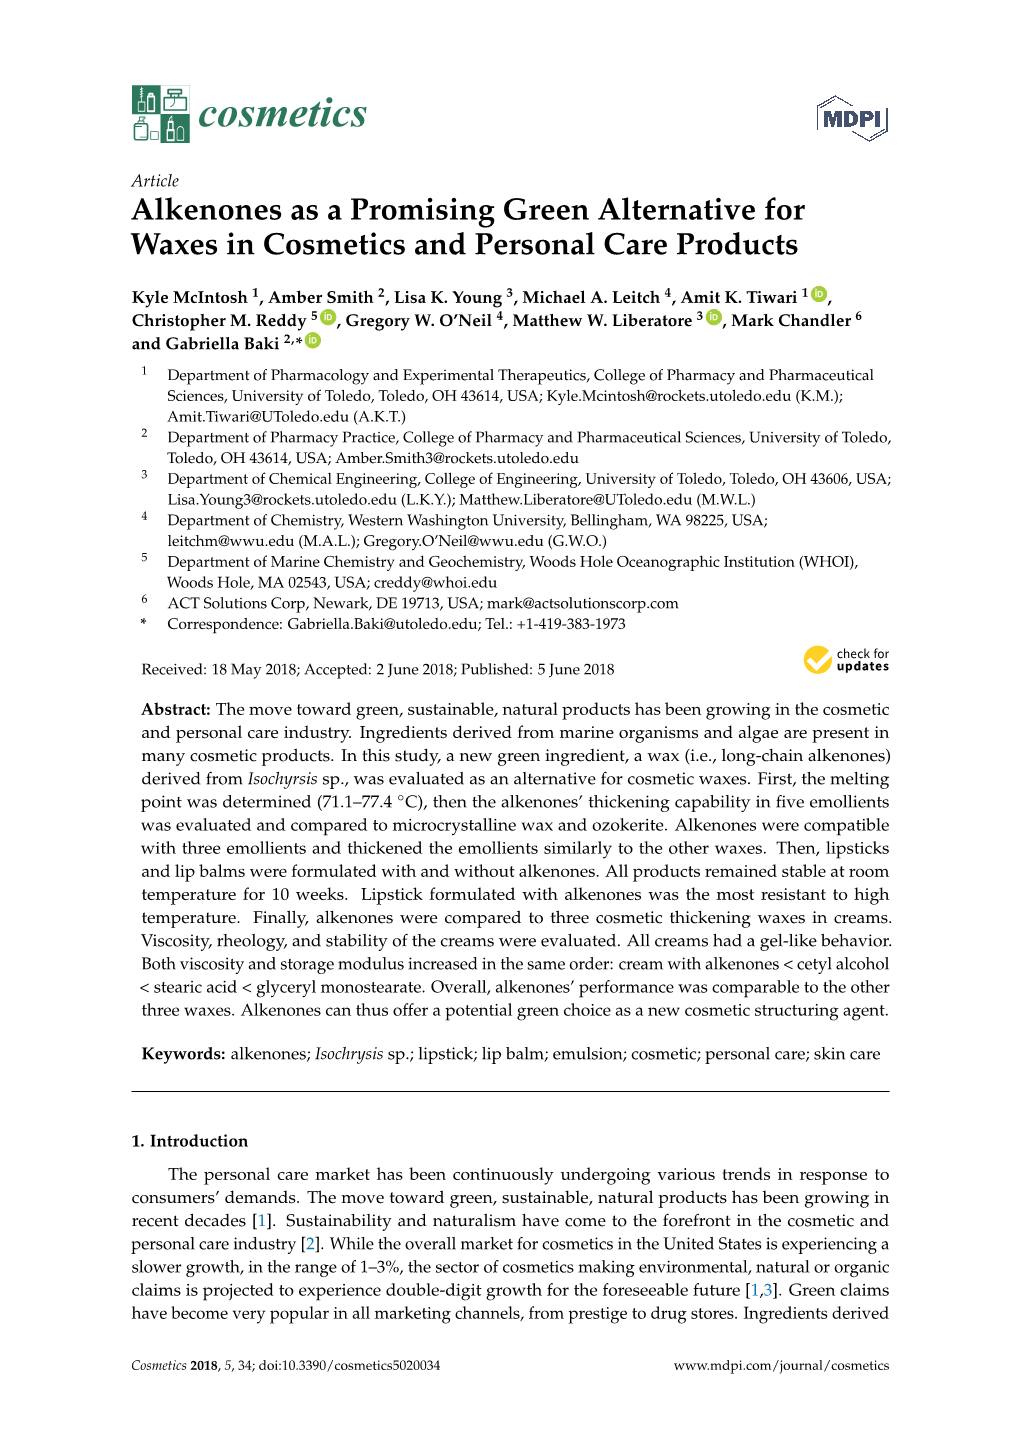 Alkenones As a Promising Green Alternative for Waxes in Cosmetics and Personal Care Products